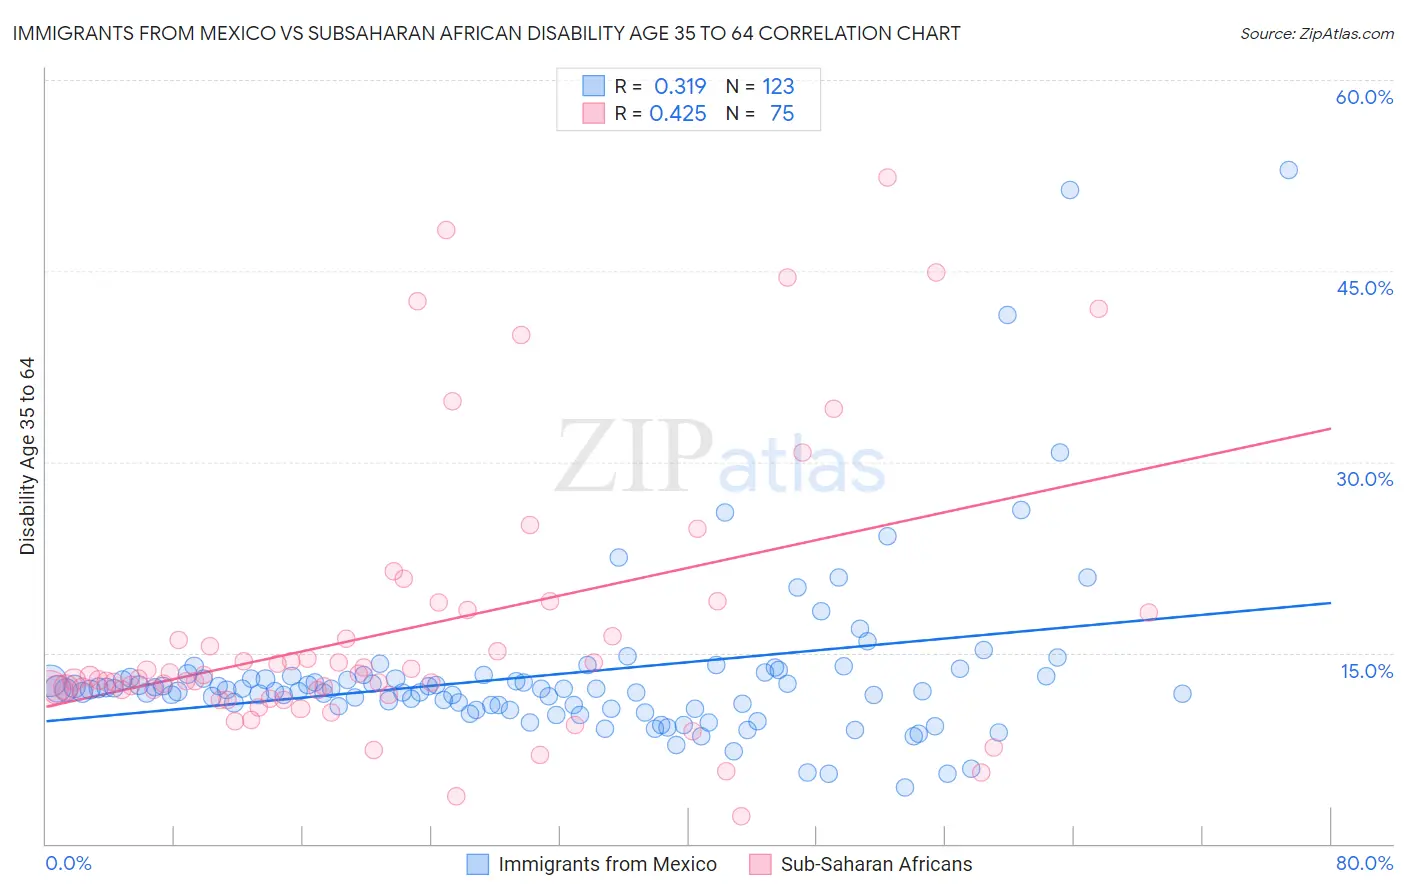 Immigrants from Mexico vs Subsaharan African Disability Age 35 to 64